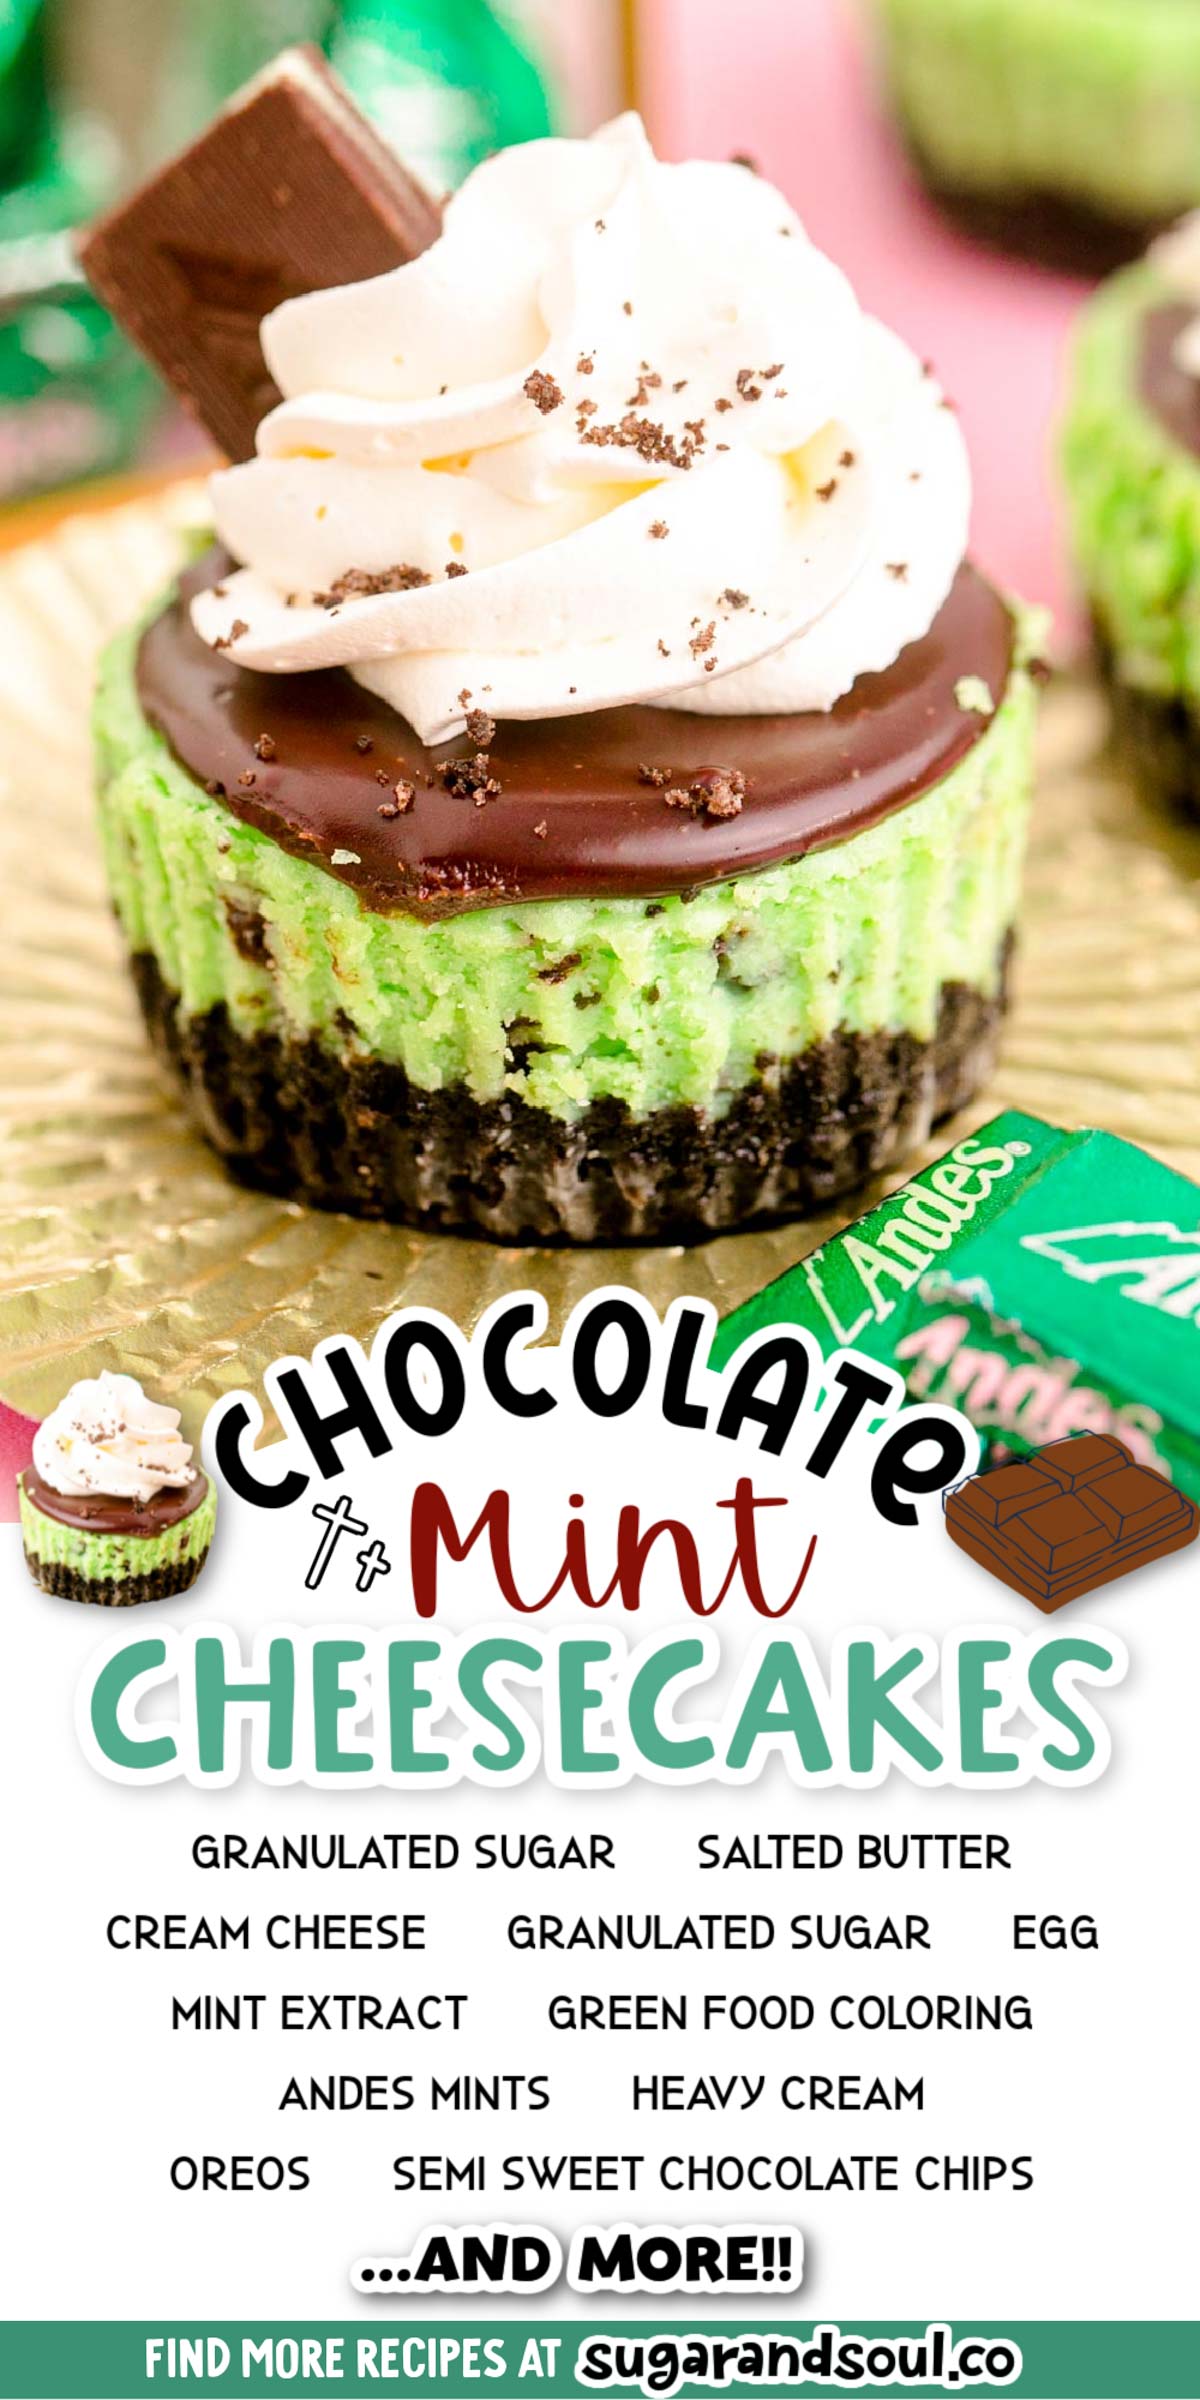 Oreo Chocolate Mint Cheesecakes are mini desserts that have an Oreo crust with a mint cheesecake filling that's studded with Andes mints! Finish them off with tasty toppings and you have a treat that everyone will devour! via @sugarandsoulco